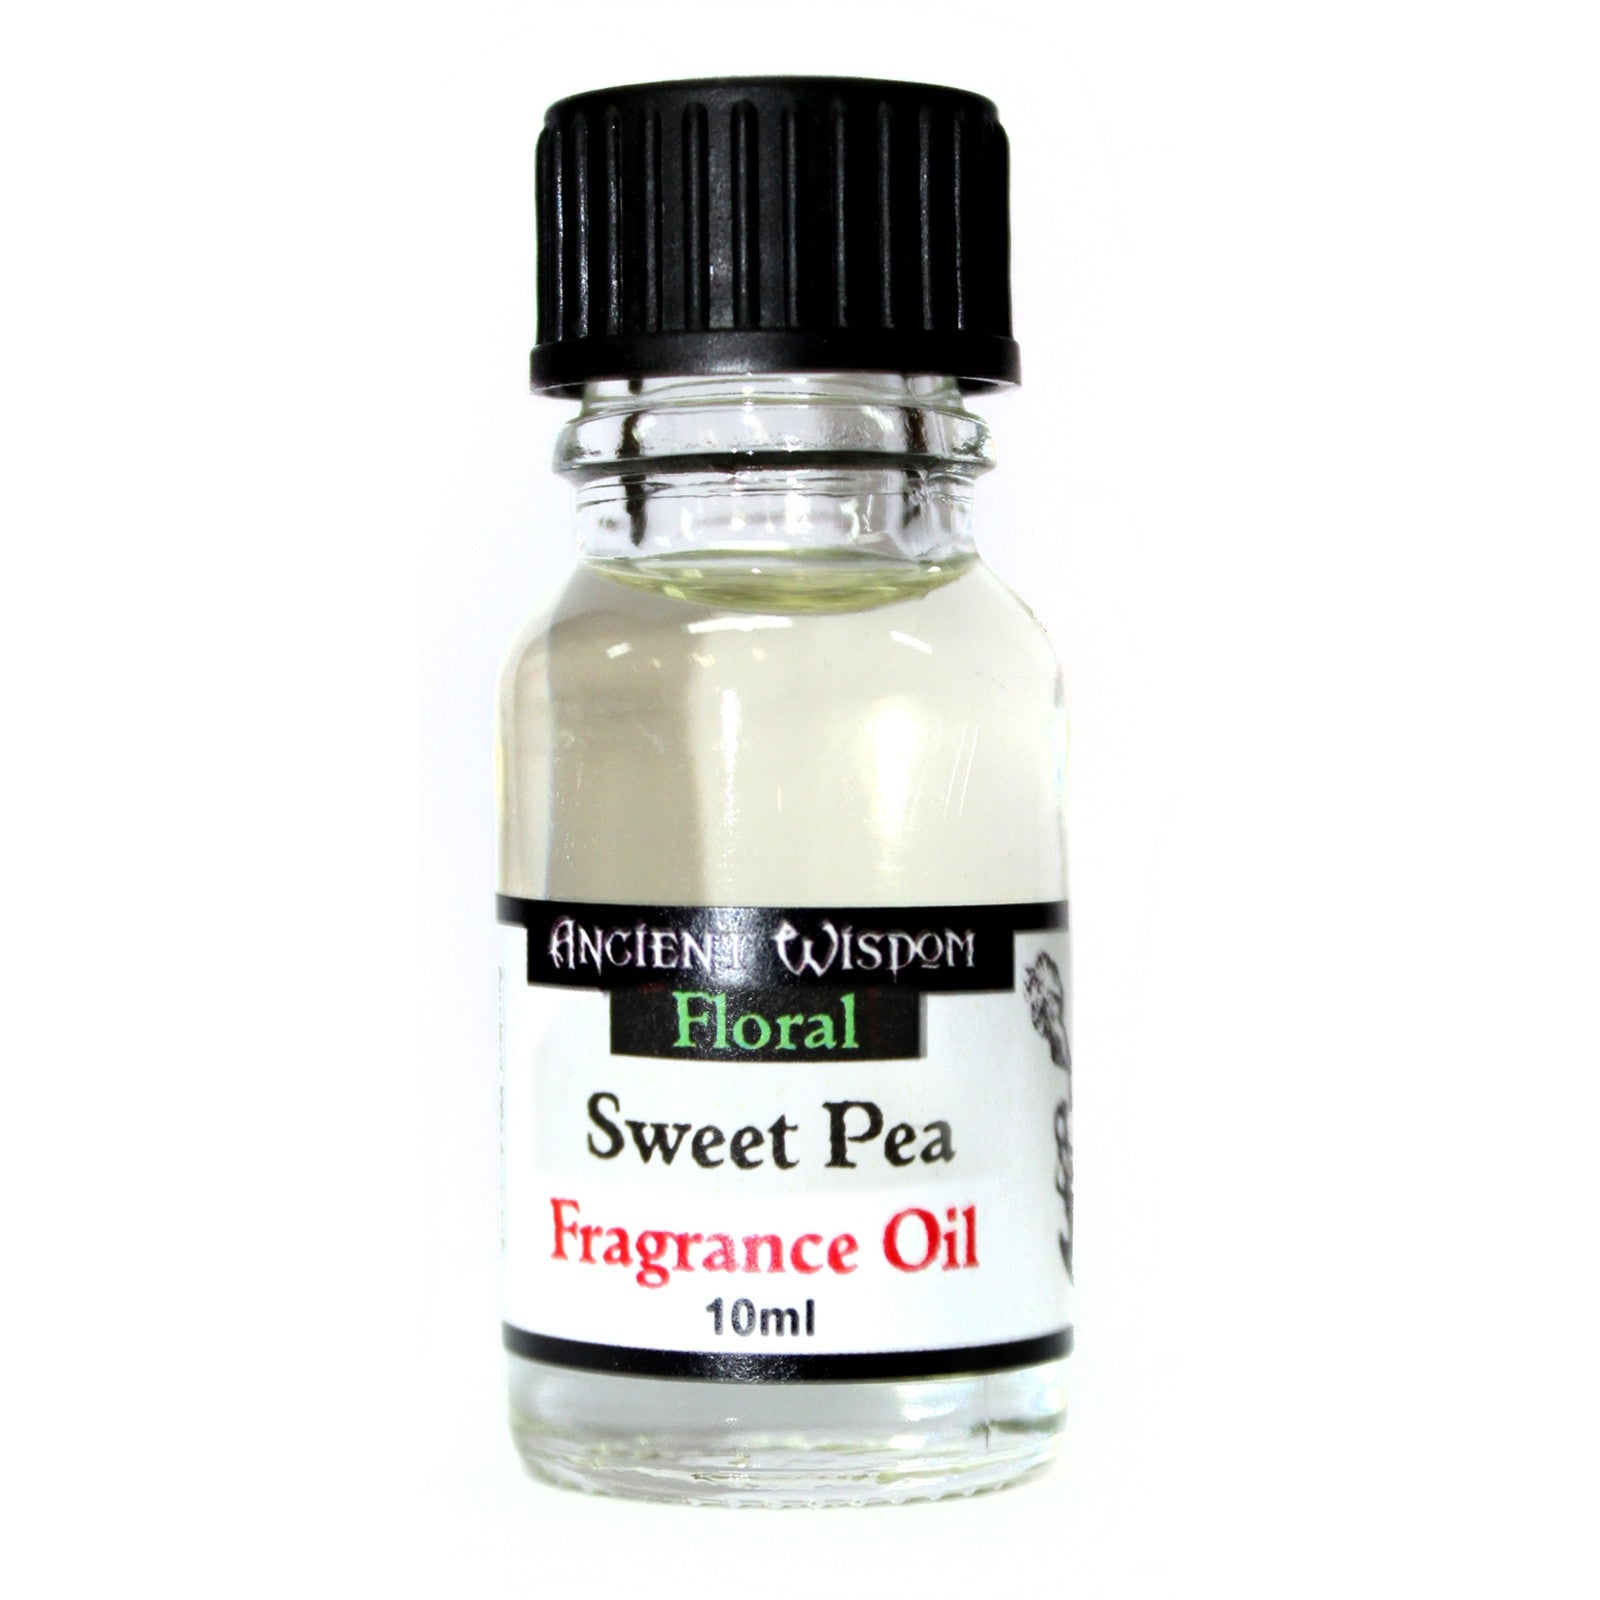 View 10ml Sweet Pea Fragrance Oil information